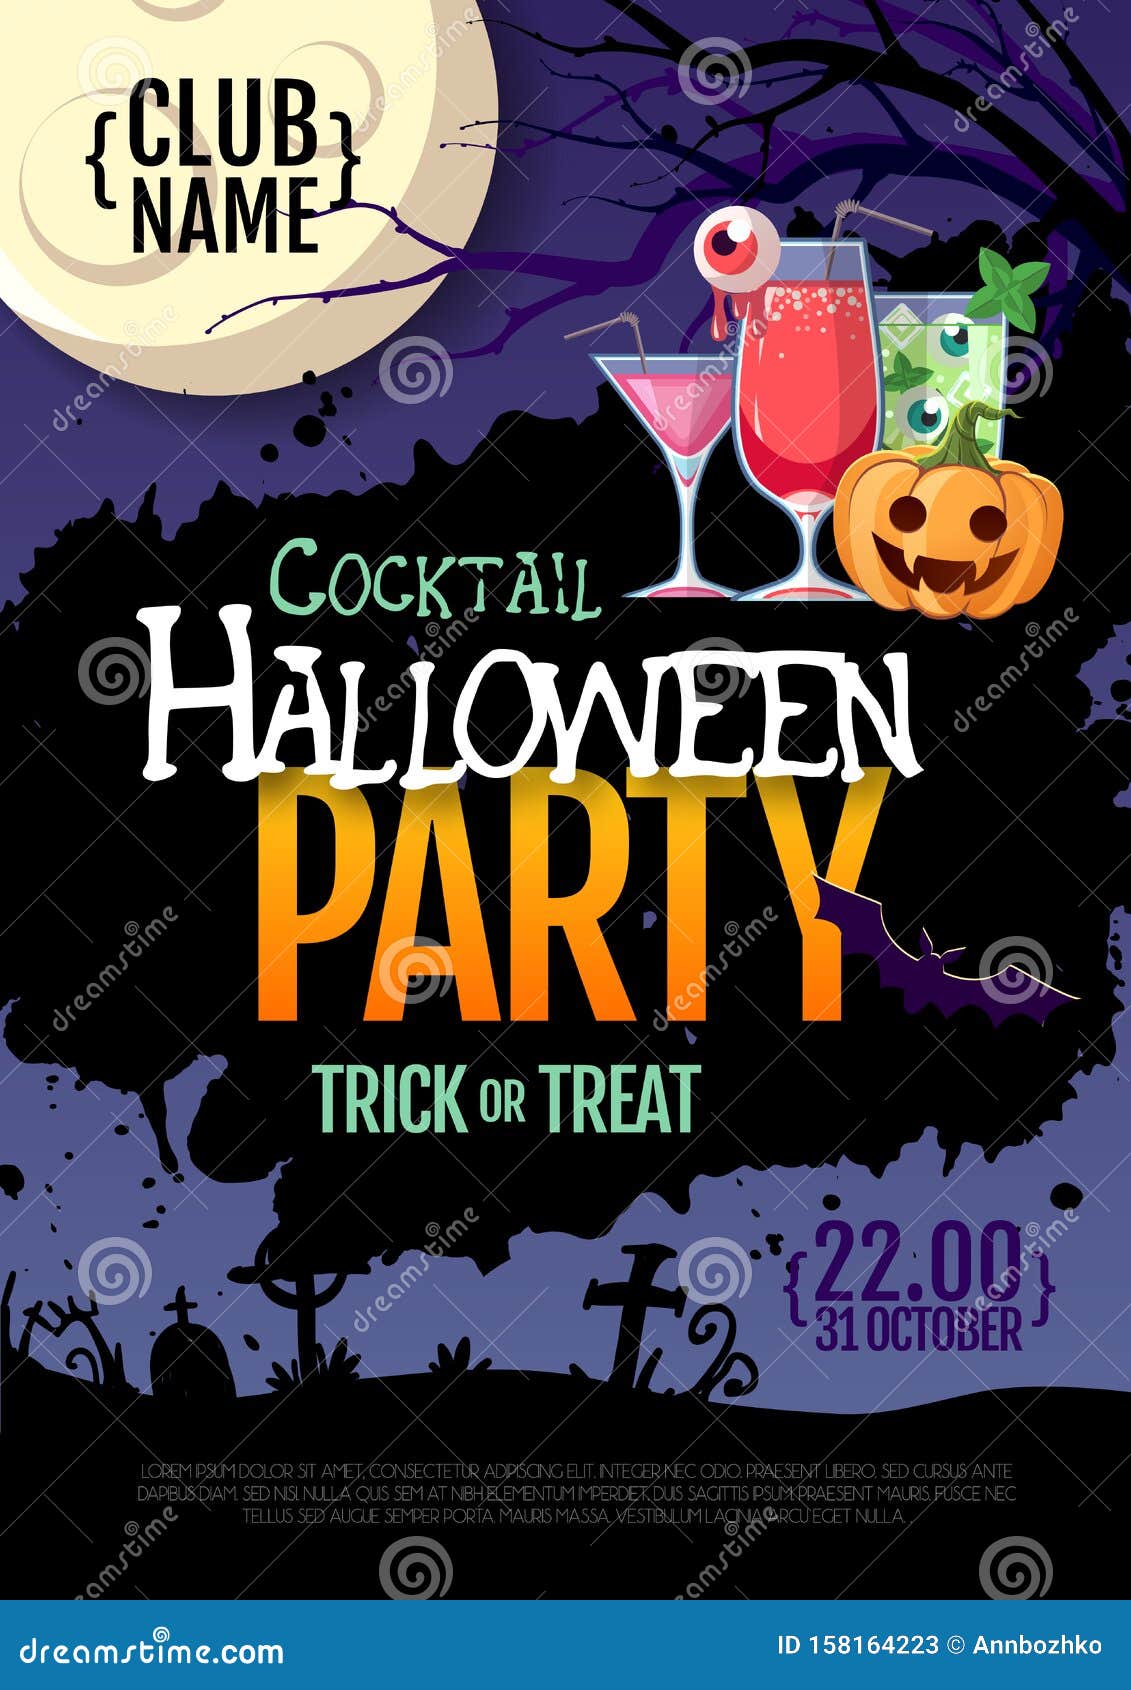 Halloween Disco Cocktail Party Poster With Jack O Lantern Pumpkin And ...